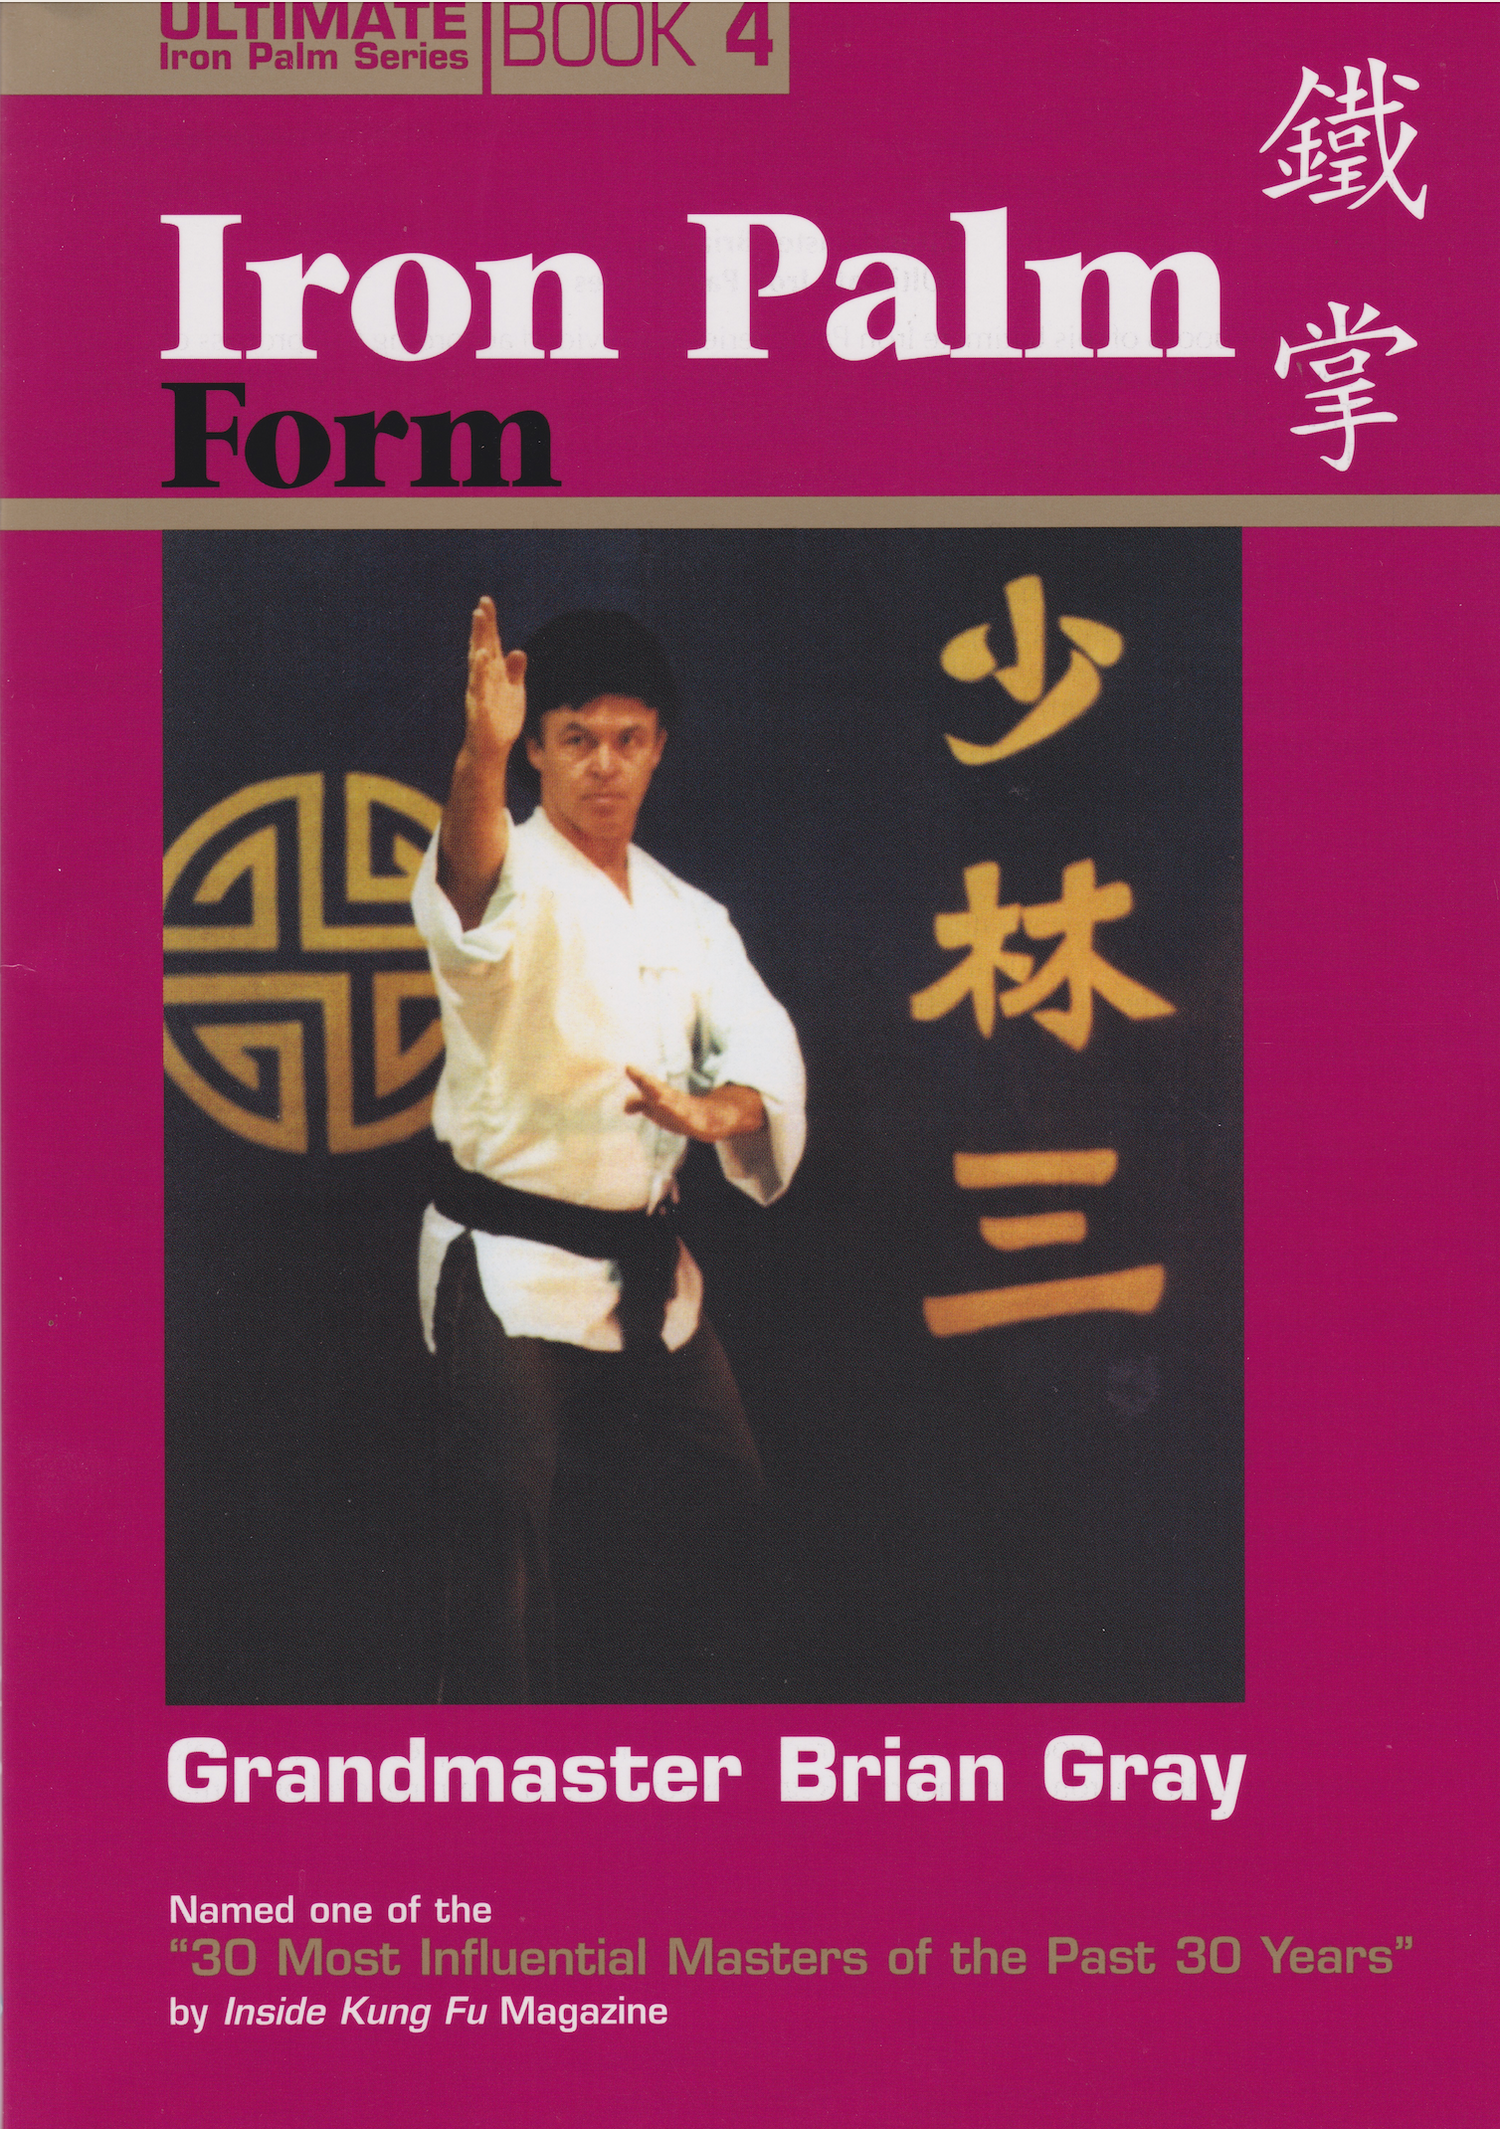 Ultimate Iron Palm Series Book 4: Iron Palm Form by Brian Gray (Preowned)